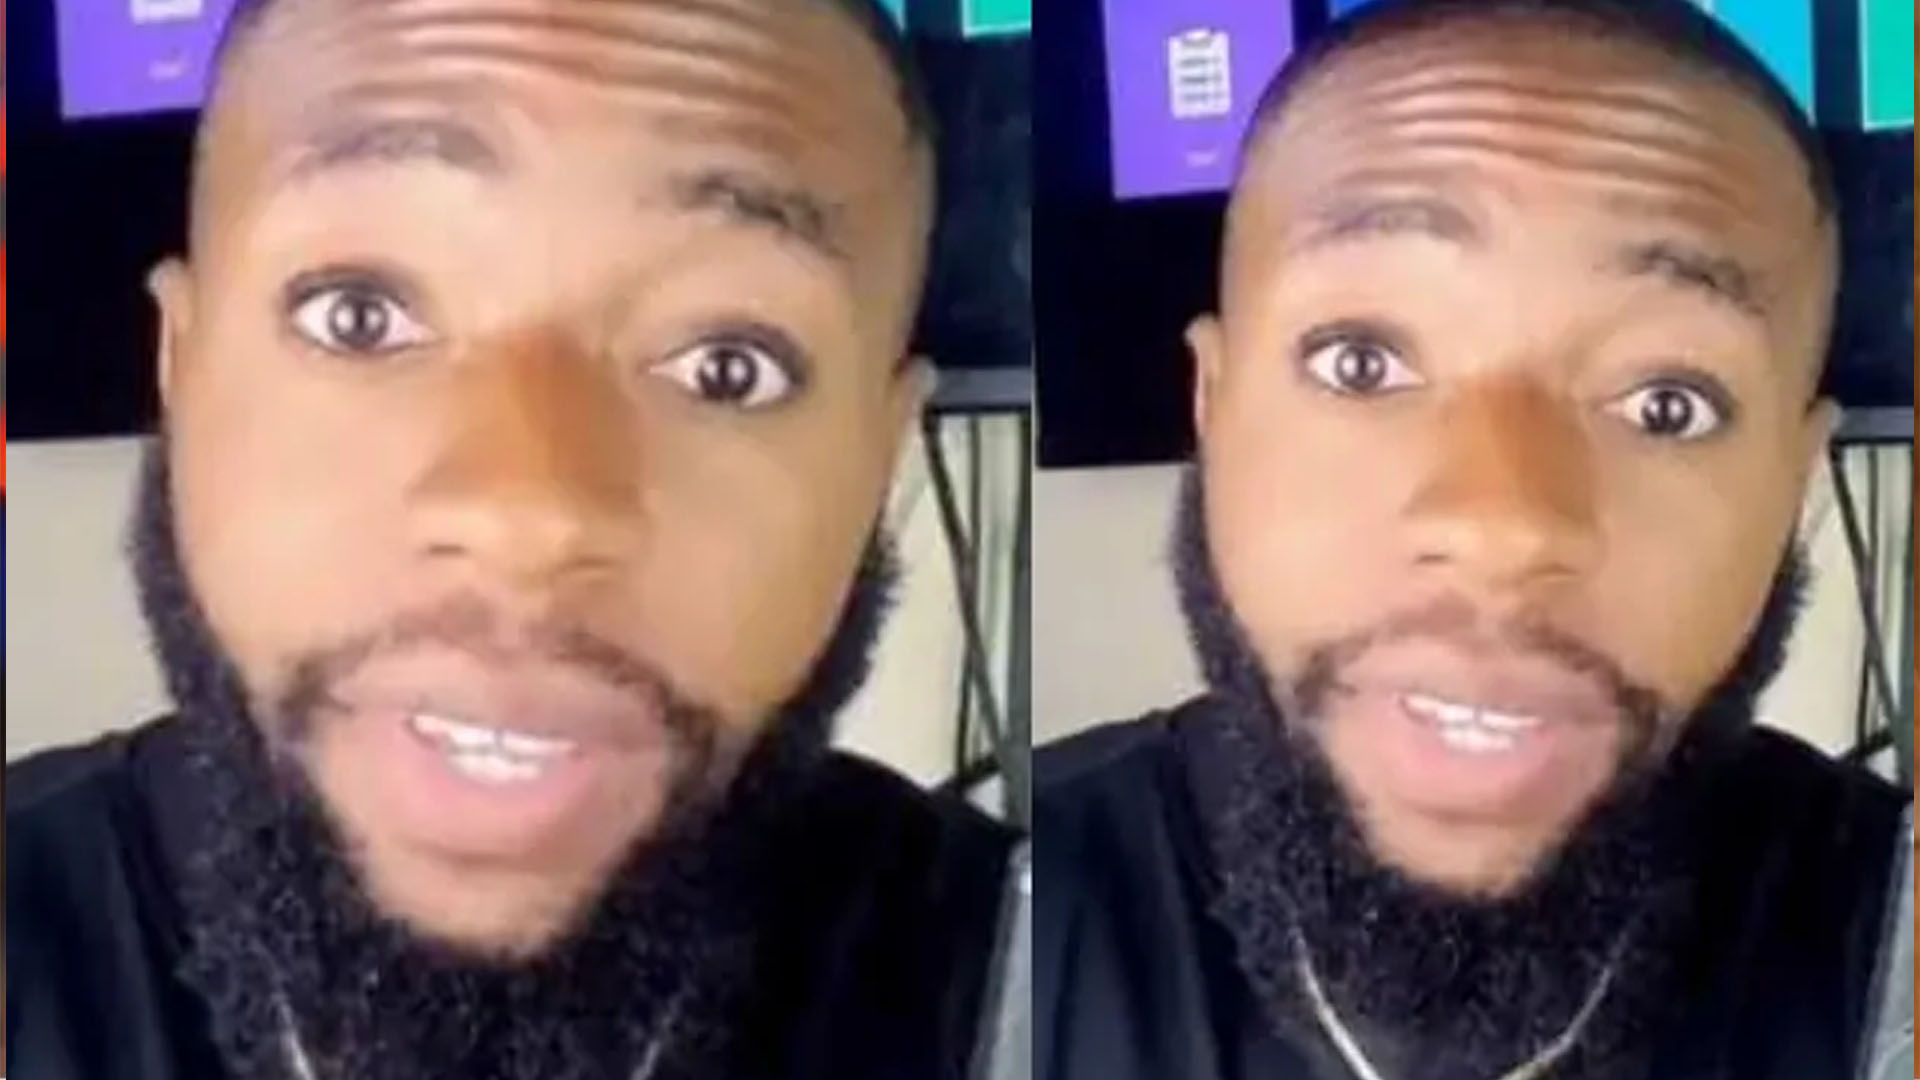 Nigerian man explains in video how Nigeria is better than Dubai and US